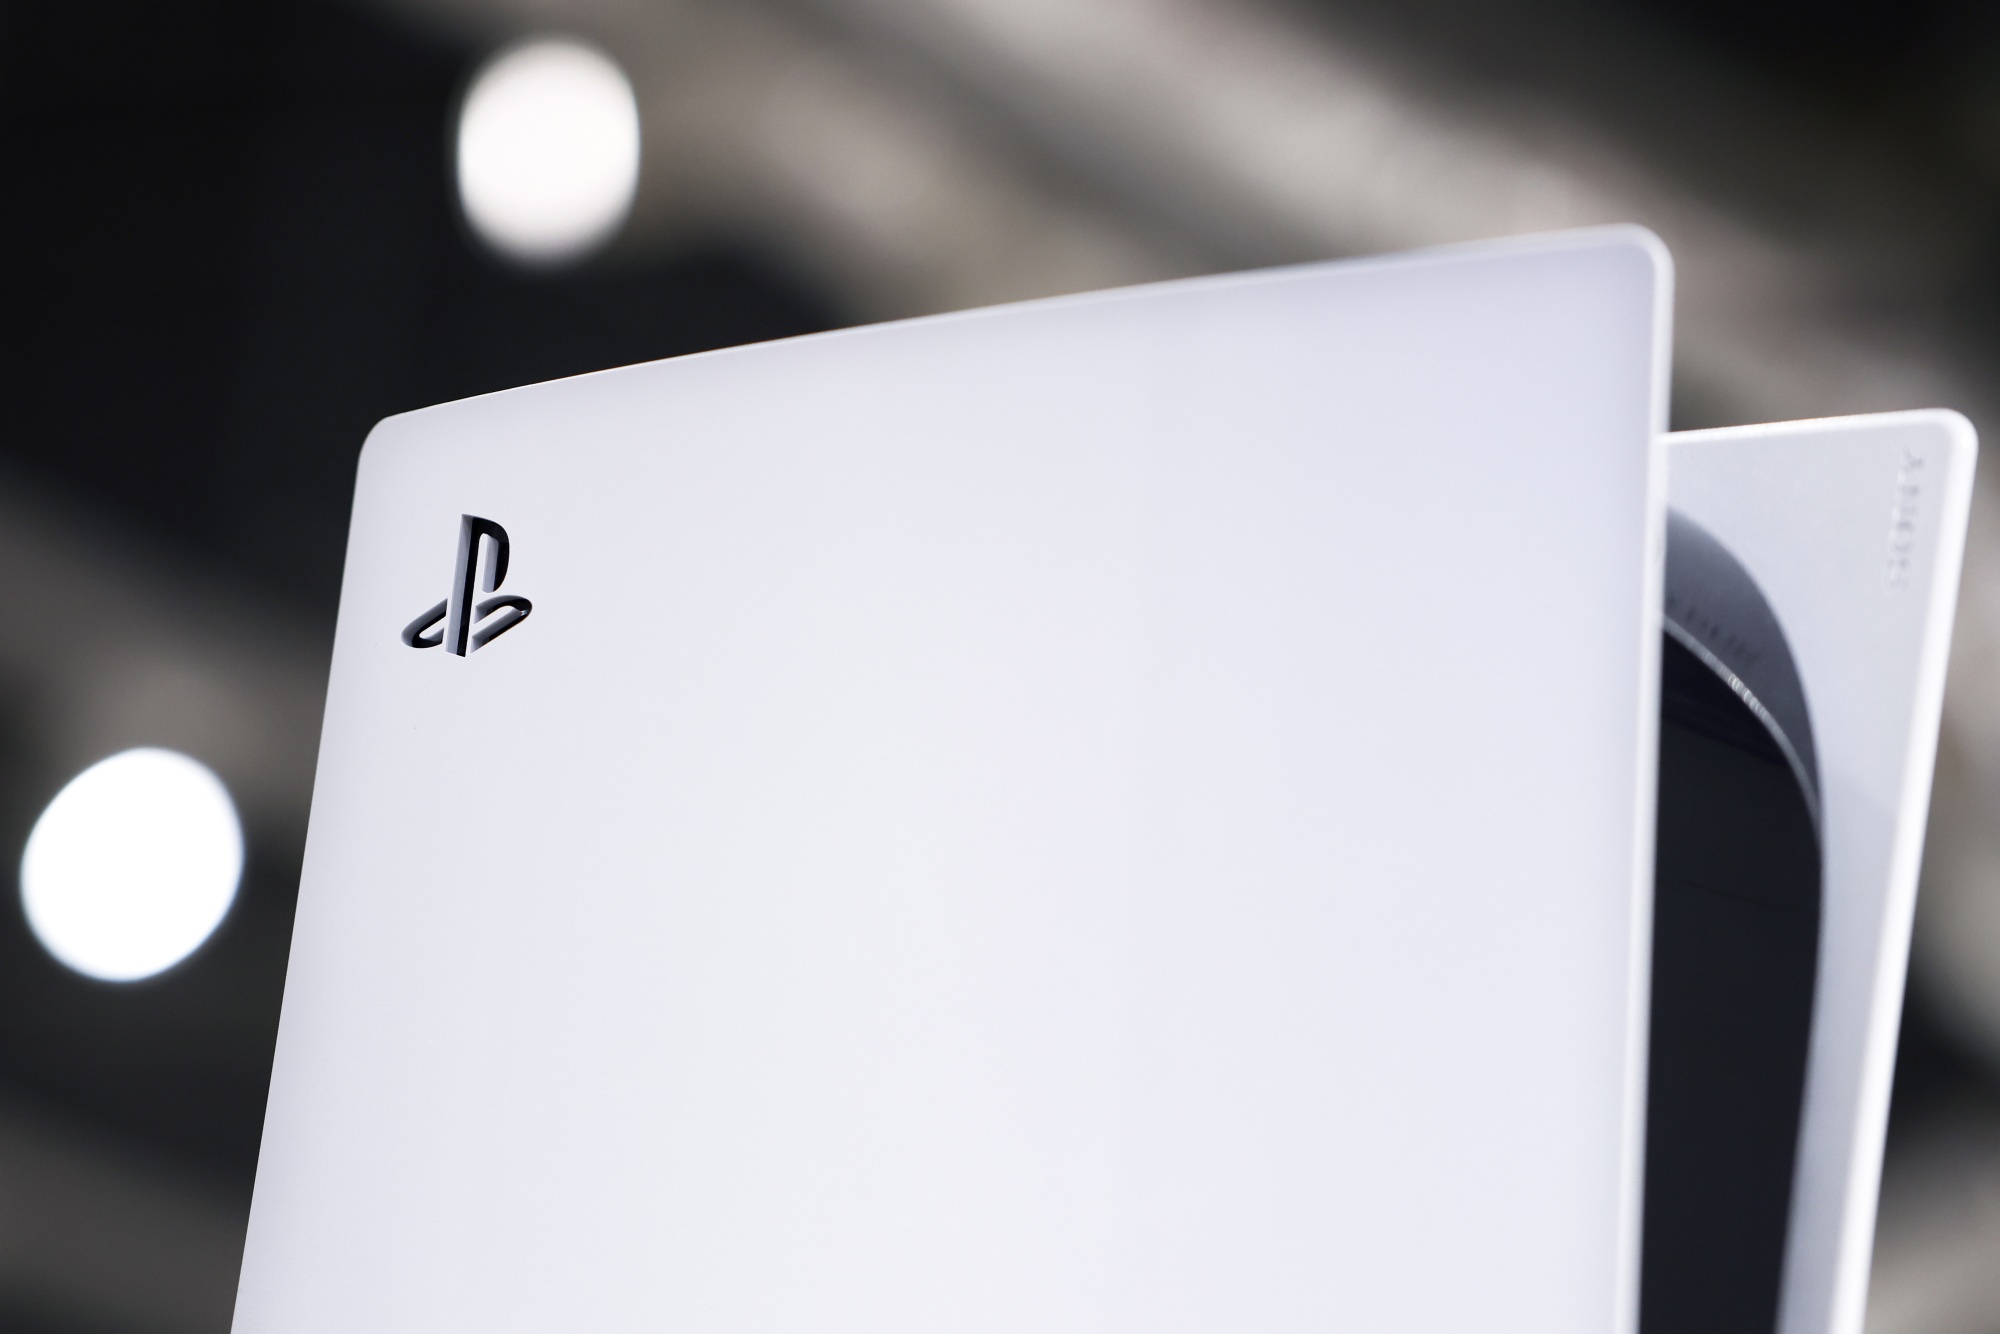 PlayStation 5 Drops Its Price for the First Time